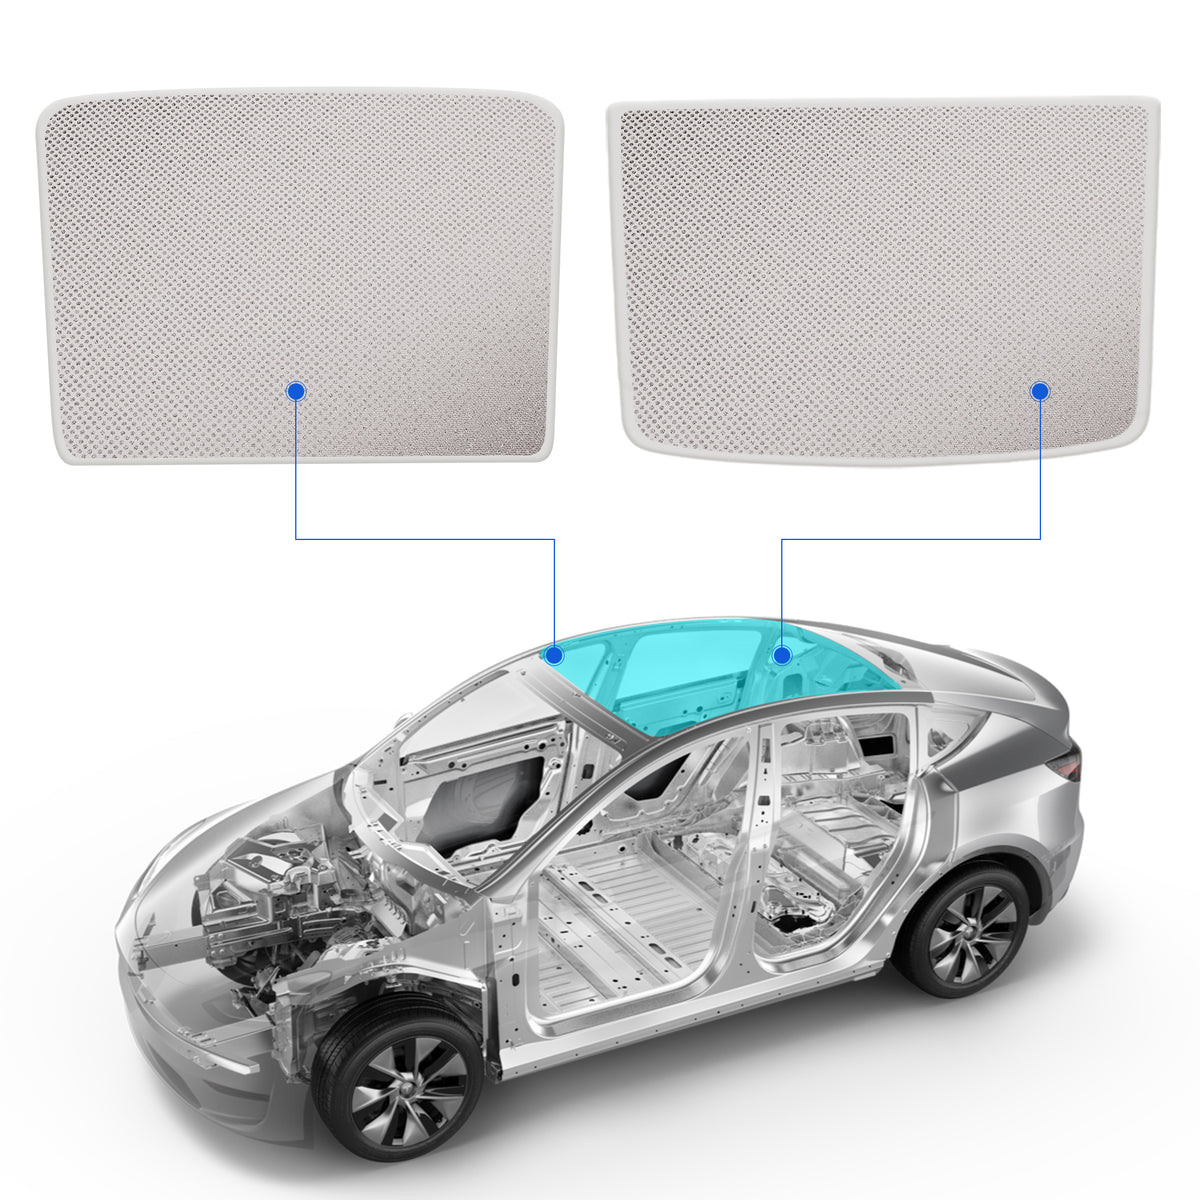 Nestour Tesla Model Y Sunshade, ice Crystal and Nano Coated Foldable Sunroof Window Shade Accessories Fit for Tesla Model Y2016-2023, with UV/Heat Insulation Film (White Set of 2)